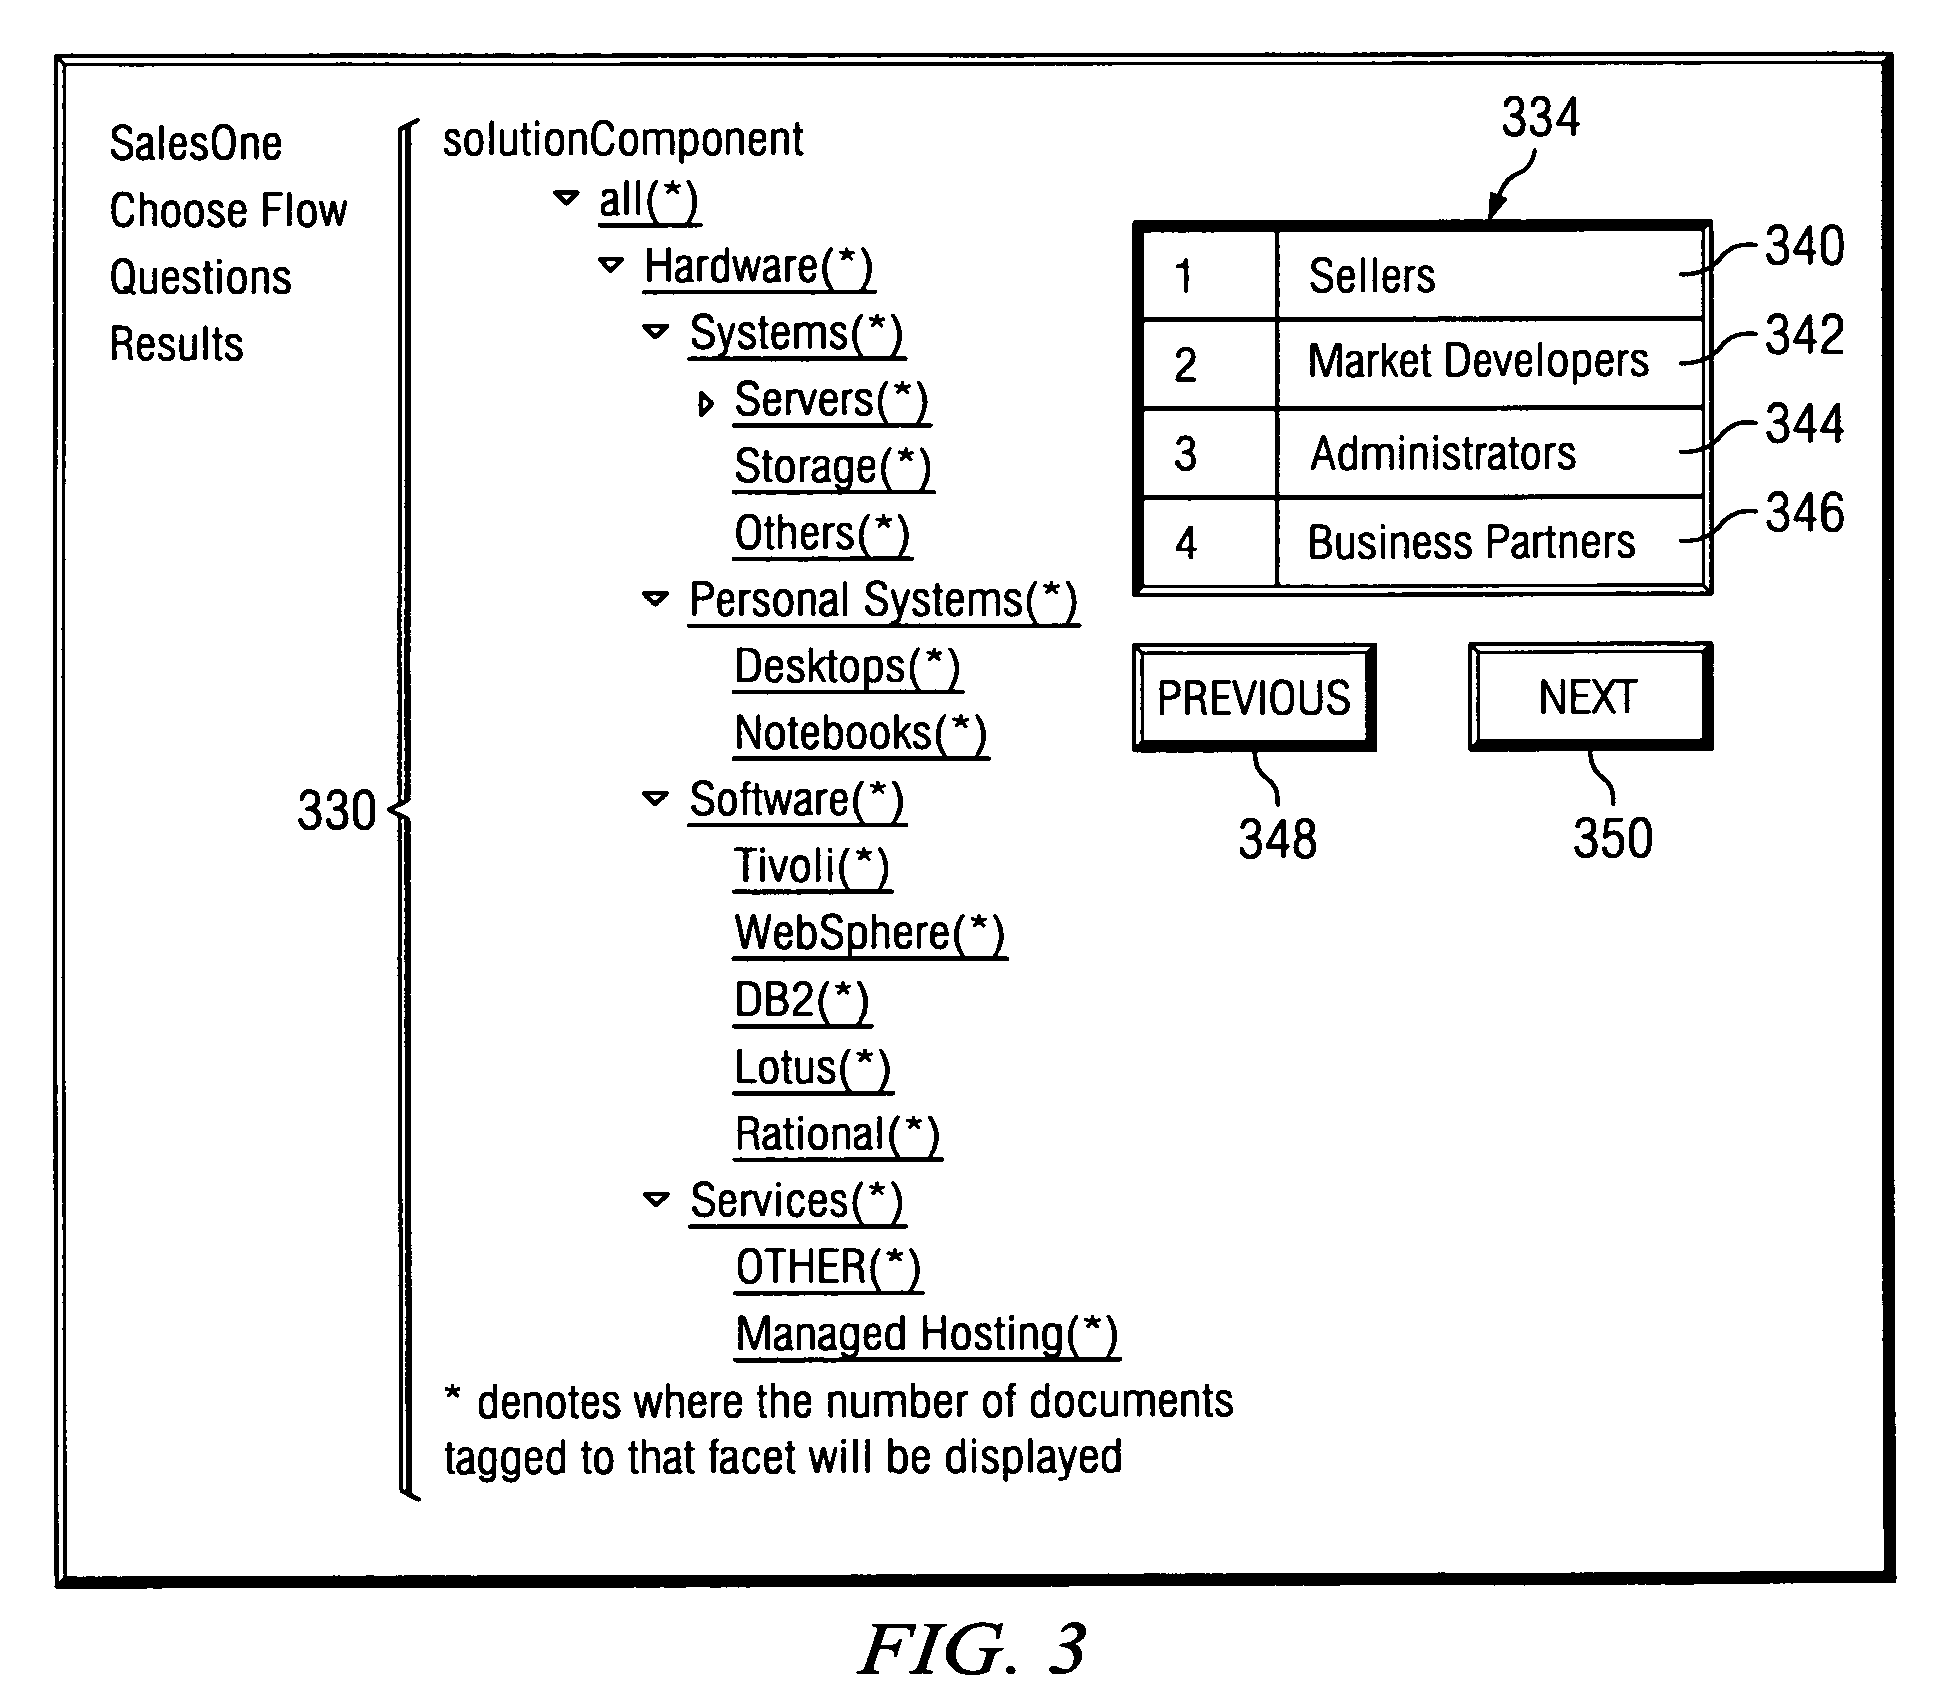 Displaying facet tree elements and logging facet element item counts to a sequence document